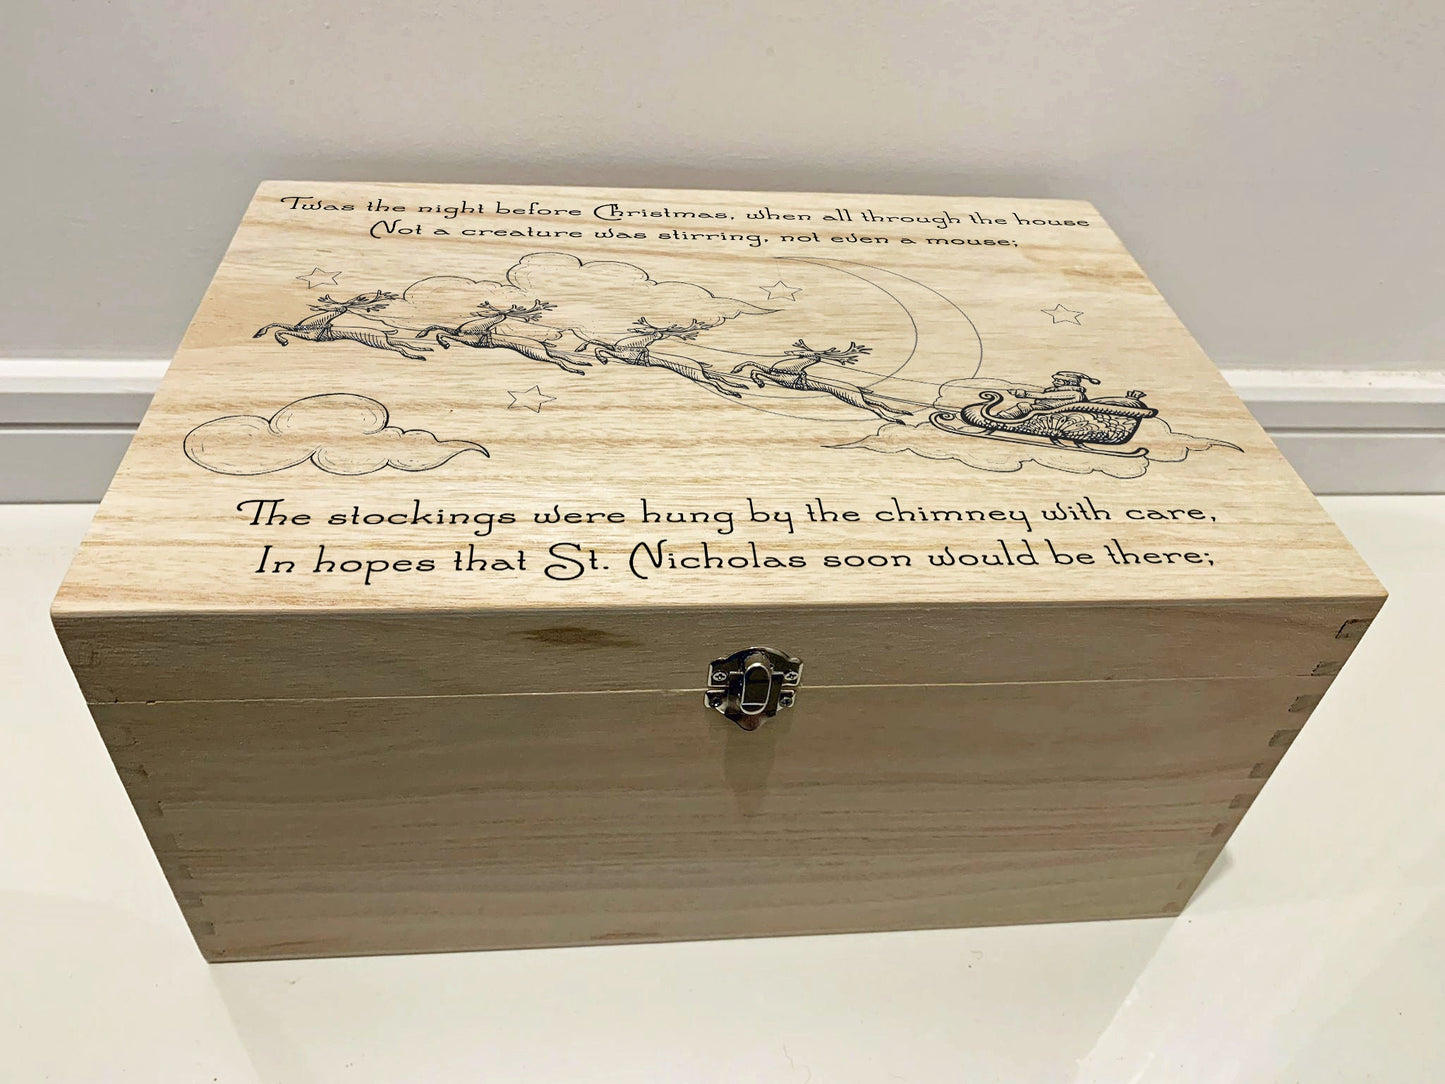 Large Personalised Engraved Wooden Christmas Eve Gift Box, Keepsake Box with Santa's Sleigh, Twas the Night before Christmas - Resplendent Aurora